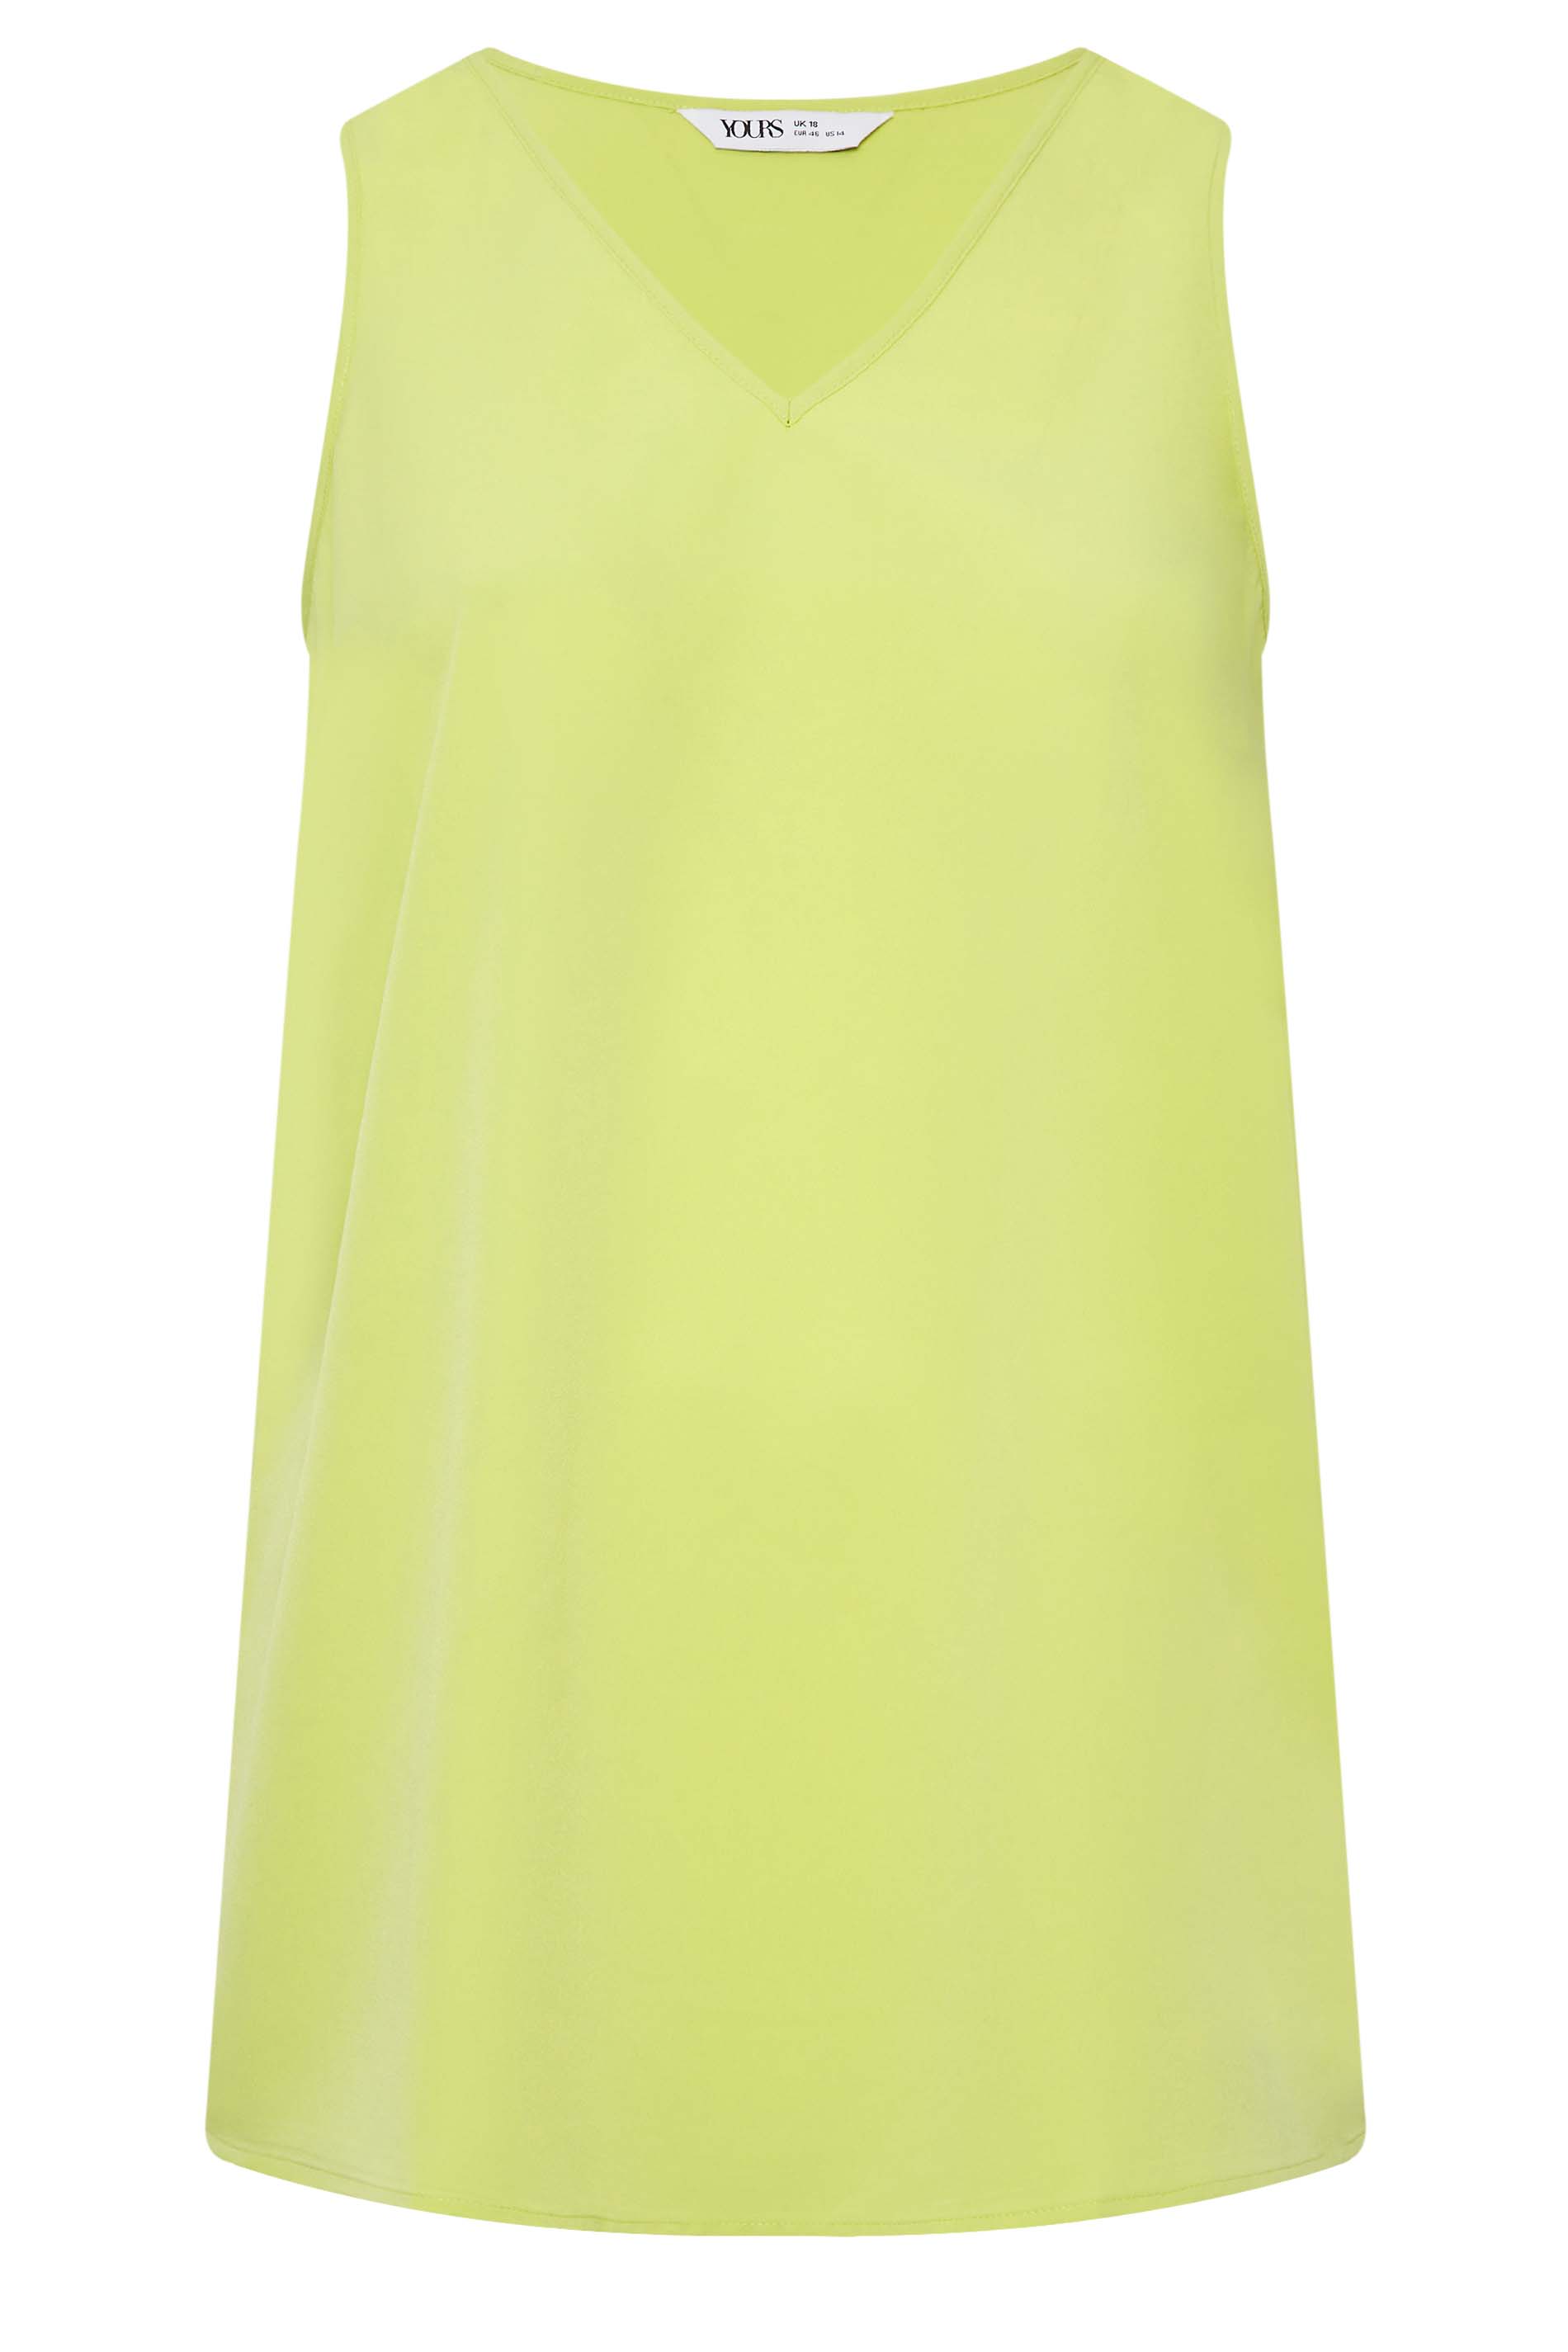 YOURS Curve Plus Size Lime Green Cami Vest Top | Yours Clothing